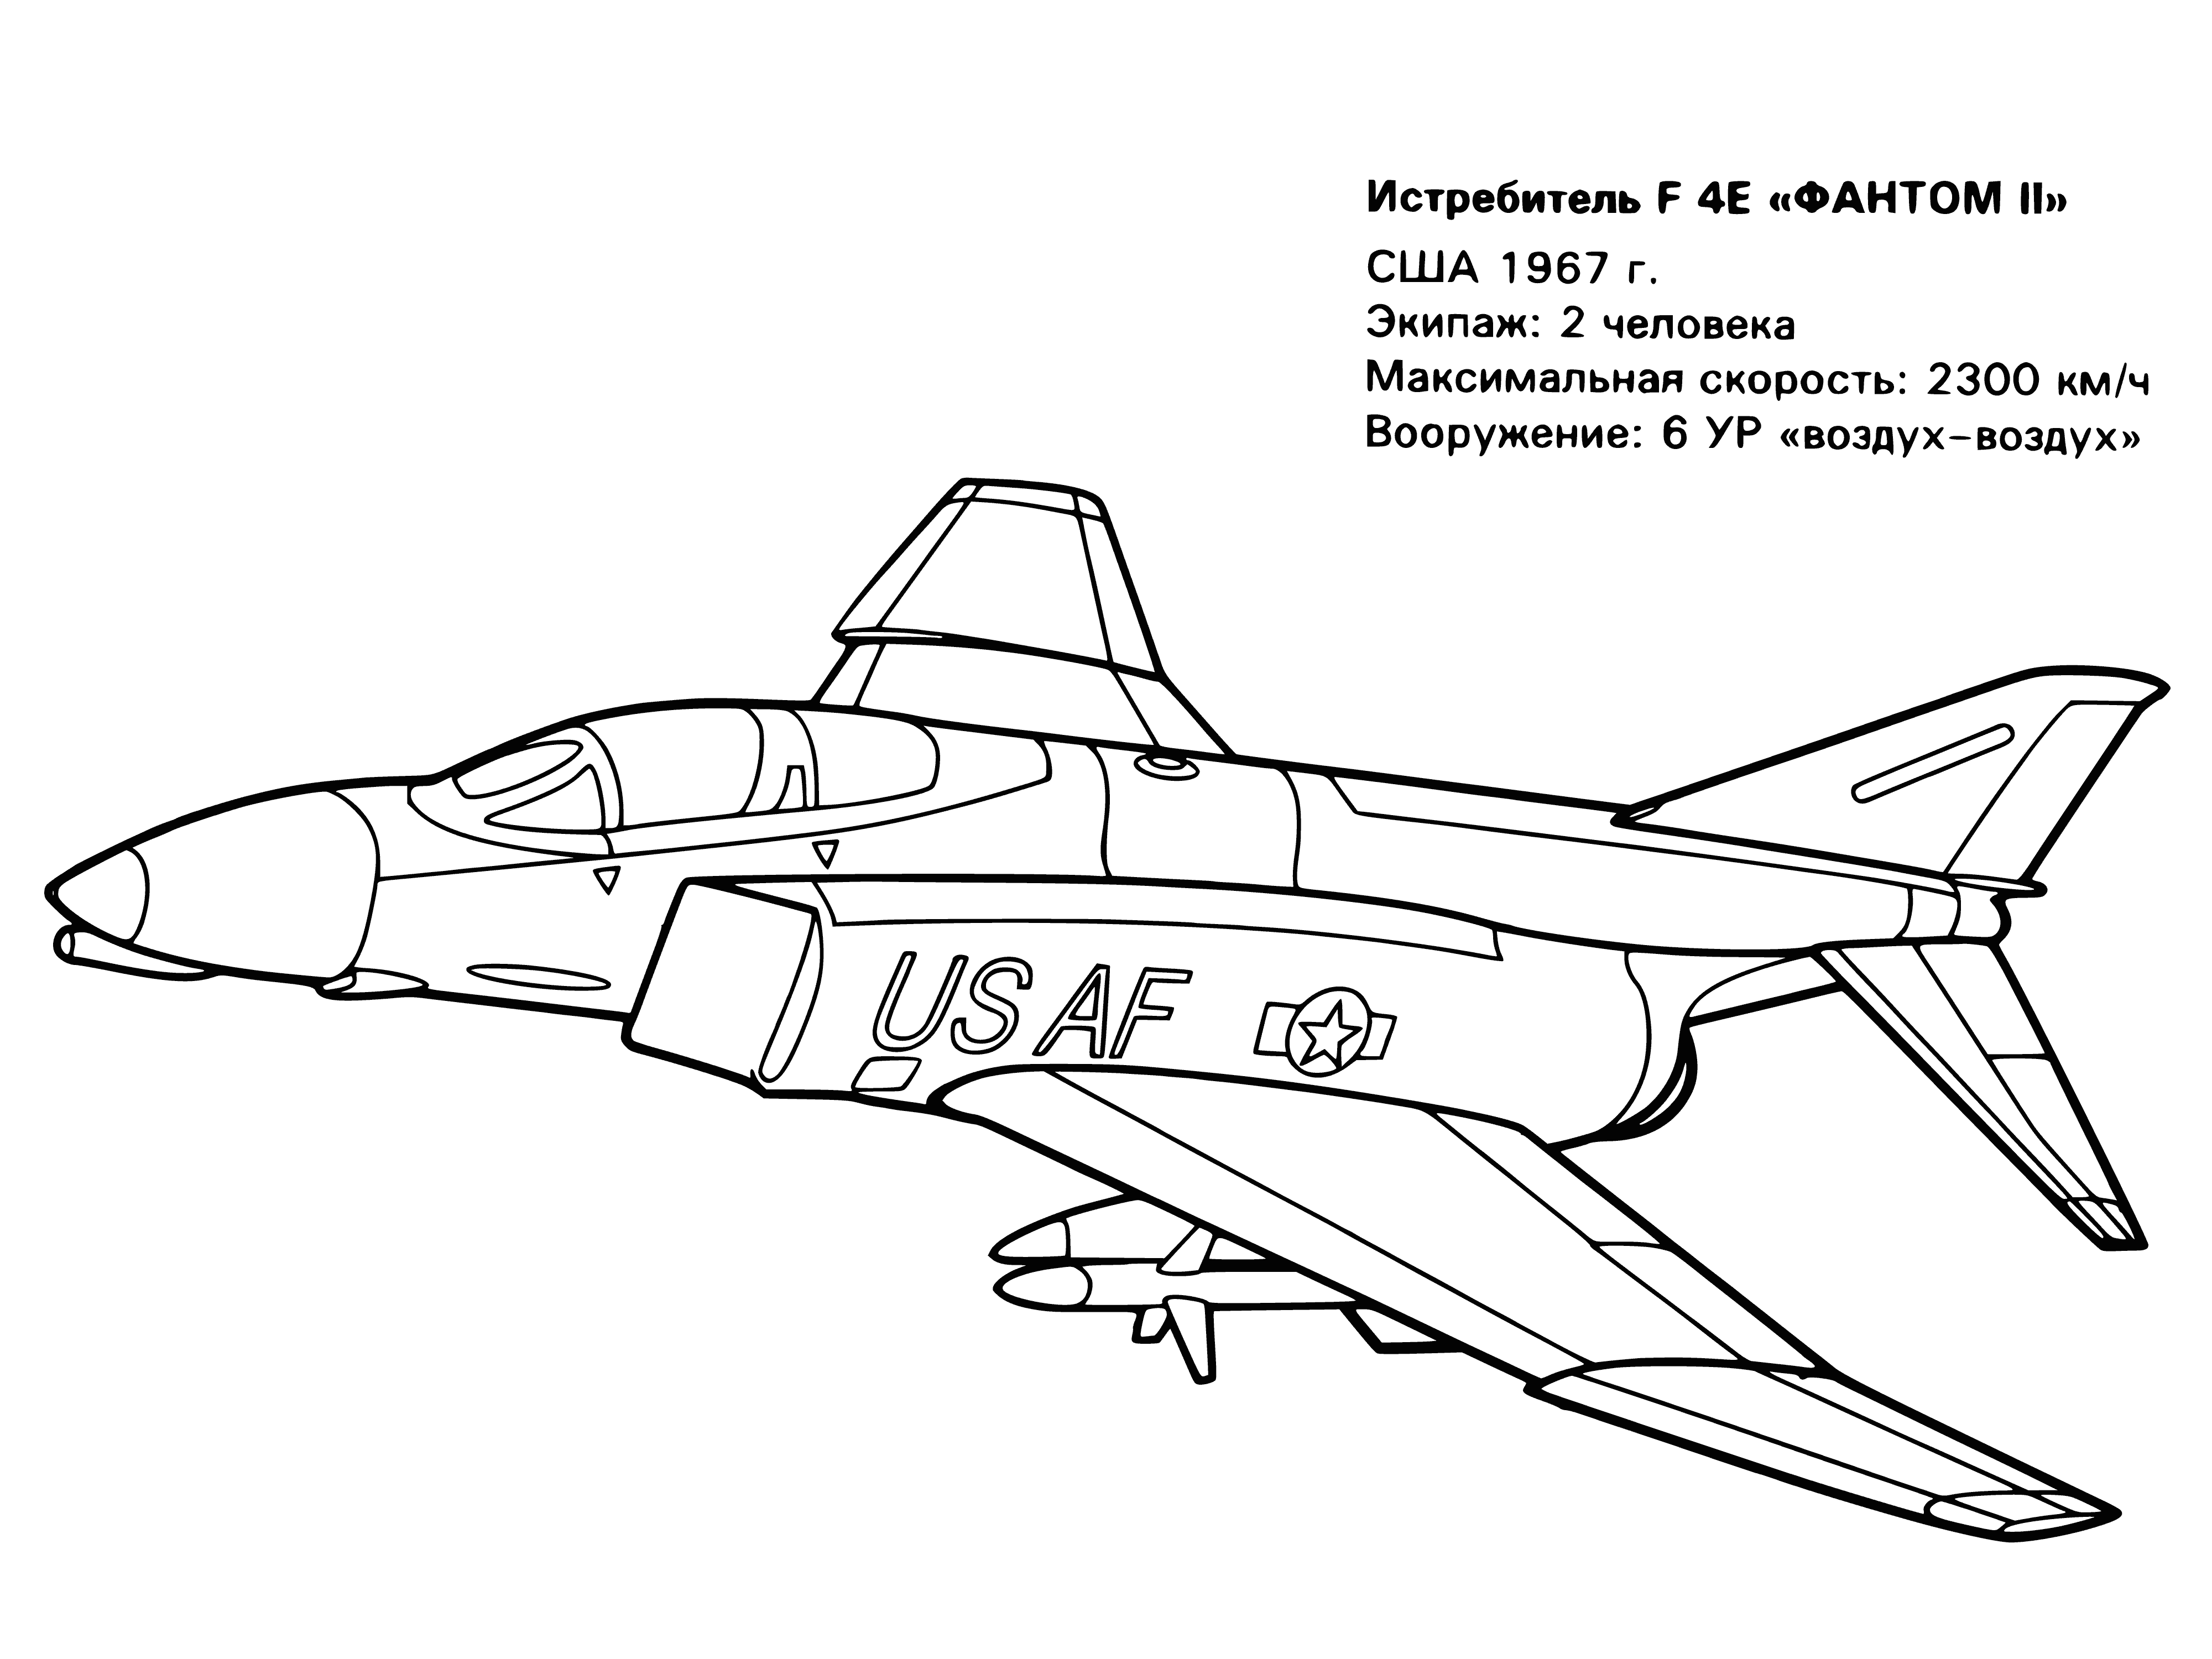 1967 USA fighter coloring page